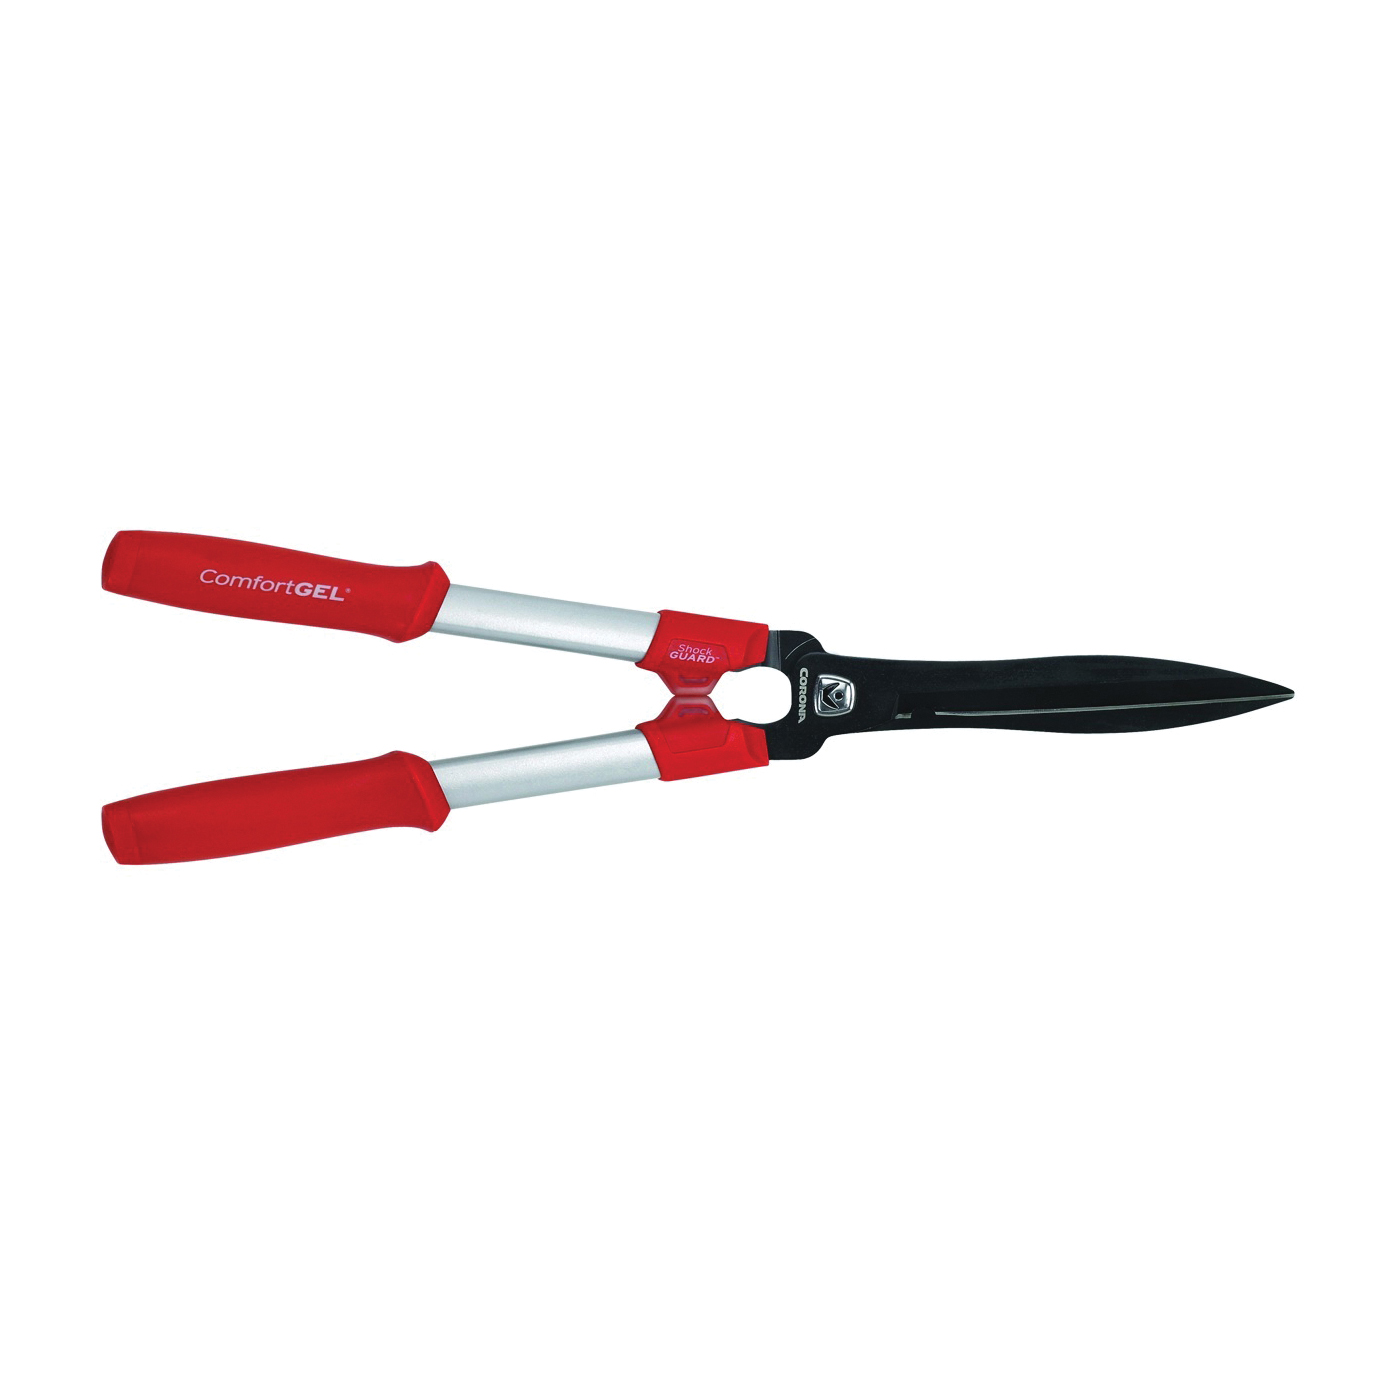 HS 3244 Hedge Shear, Steel Blade, Trapezoidal Handle, 9 in OAL